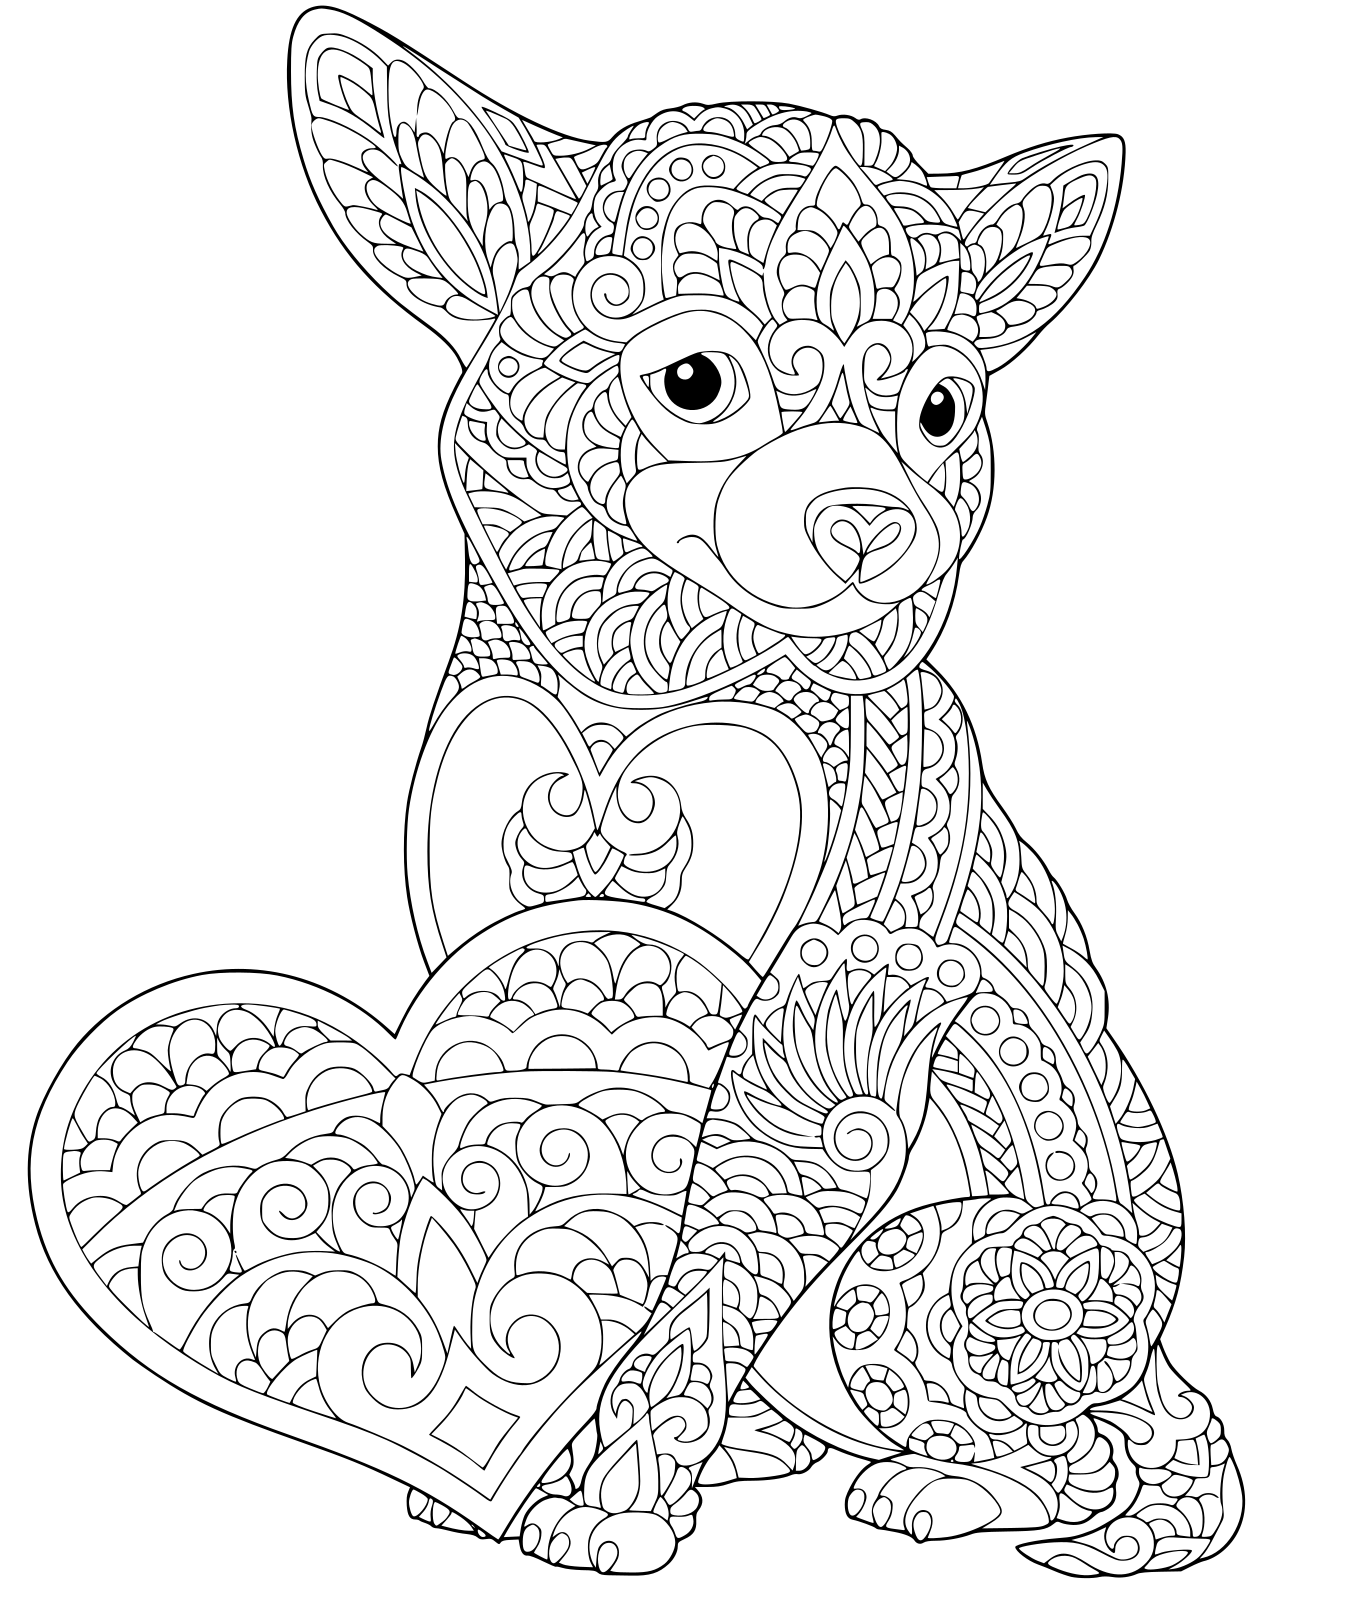 Lovely Dog With Heart For Valentines Day Card Anti Stress Coloring Page